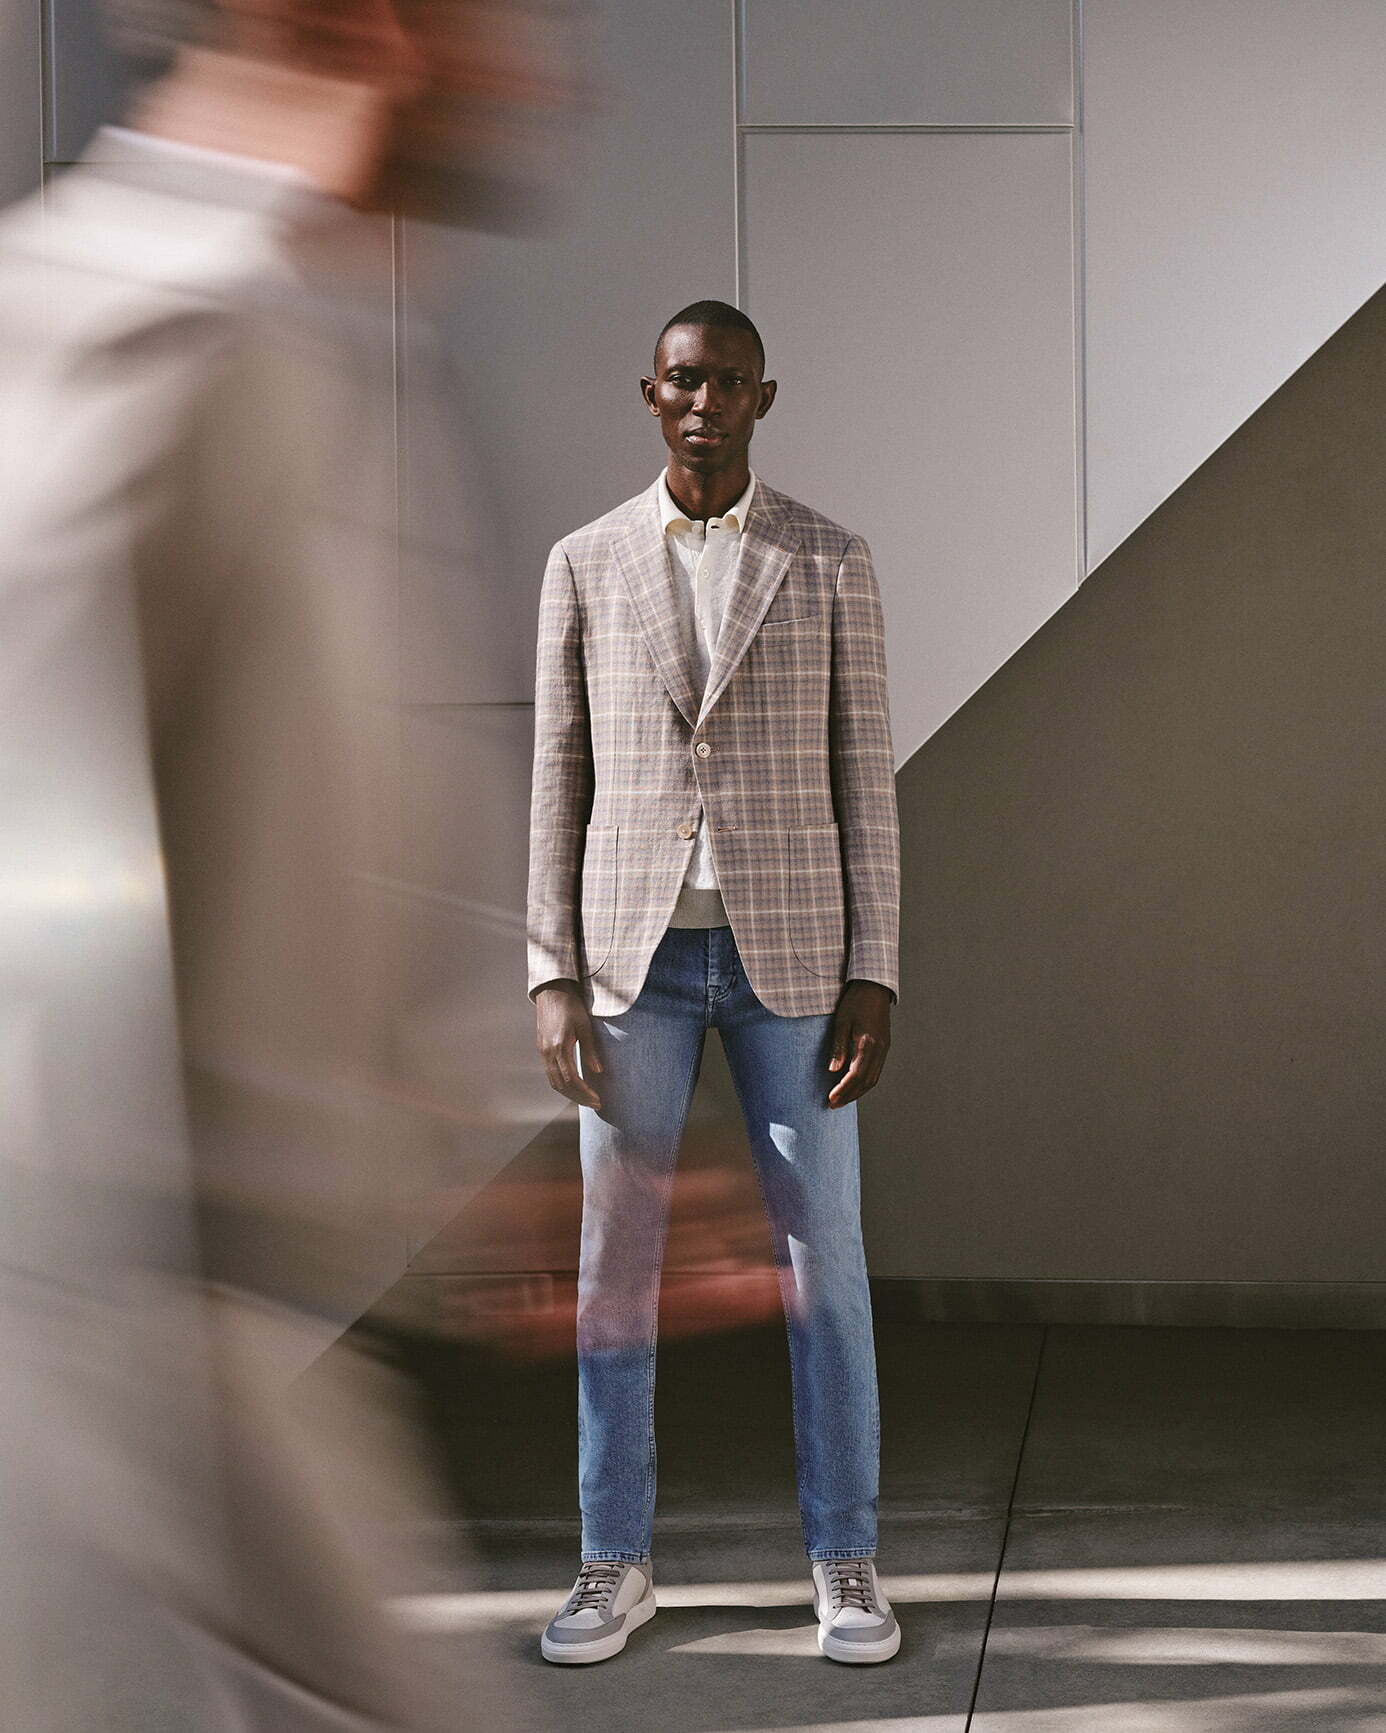 Neiman Marcus Spring 2022 Campaign: Looking Forward, Forward Looking - Isaia